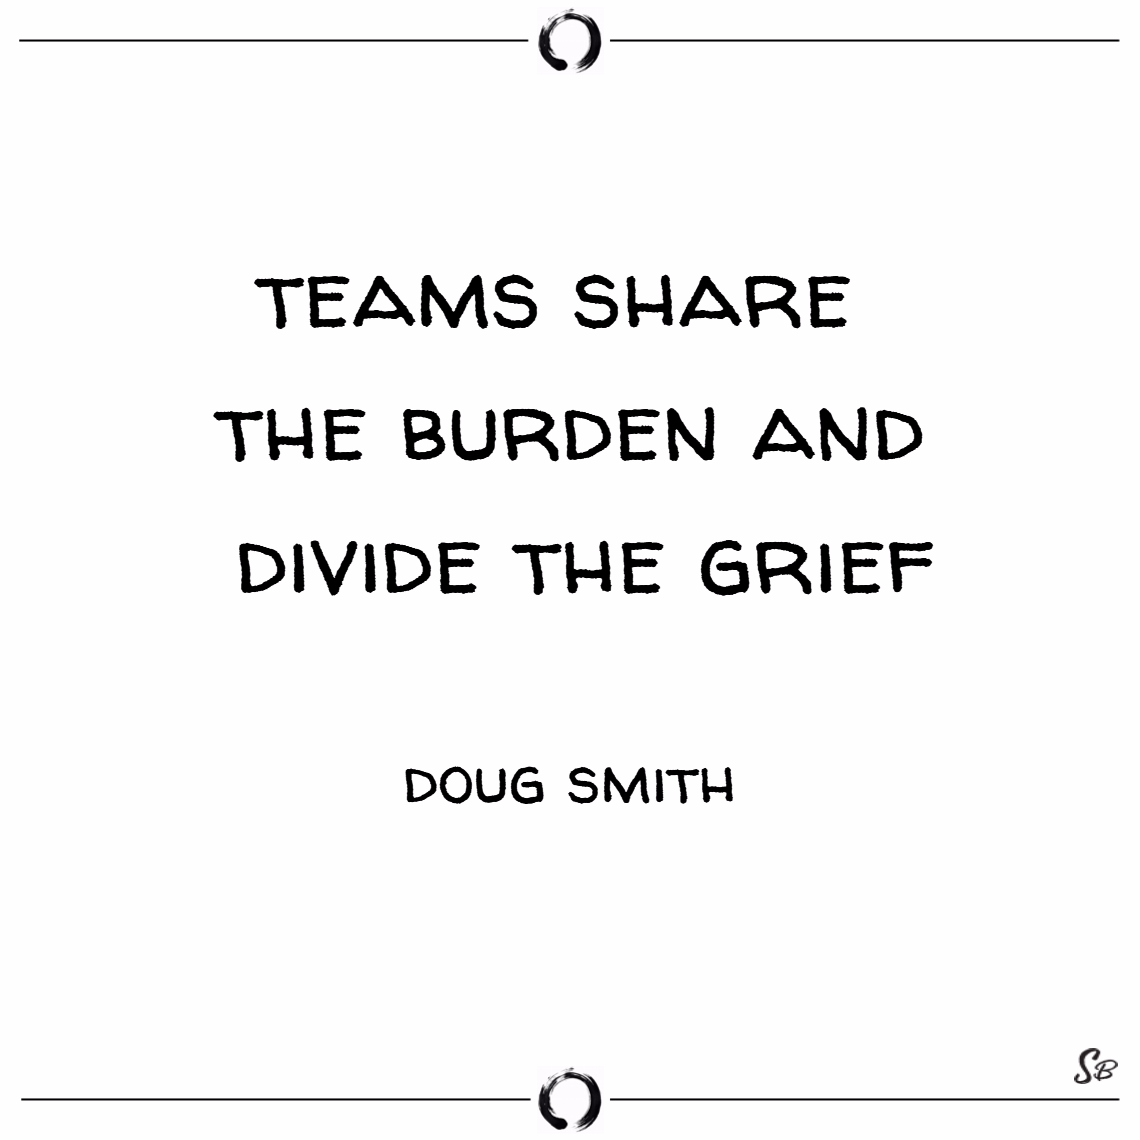 teams share the burden and divide the grief. doug smith